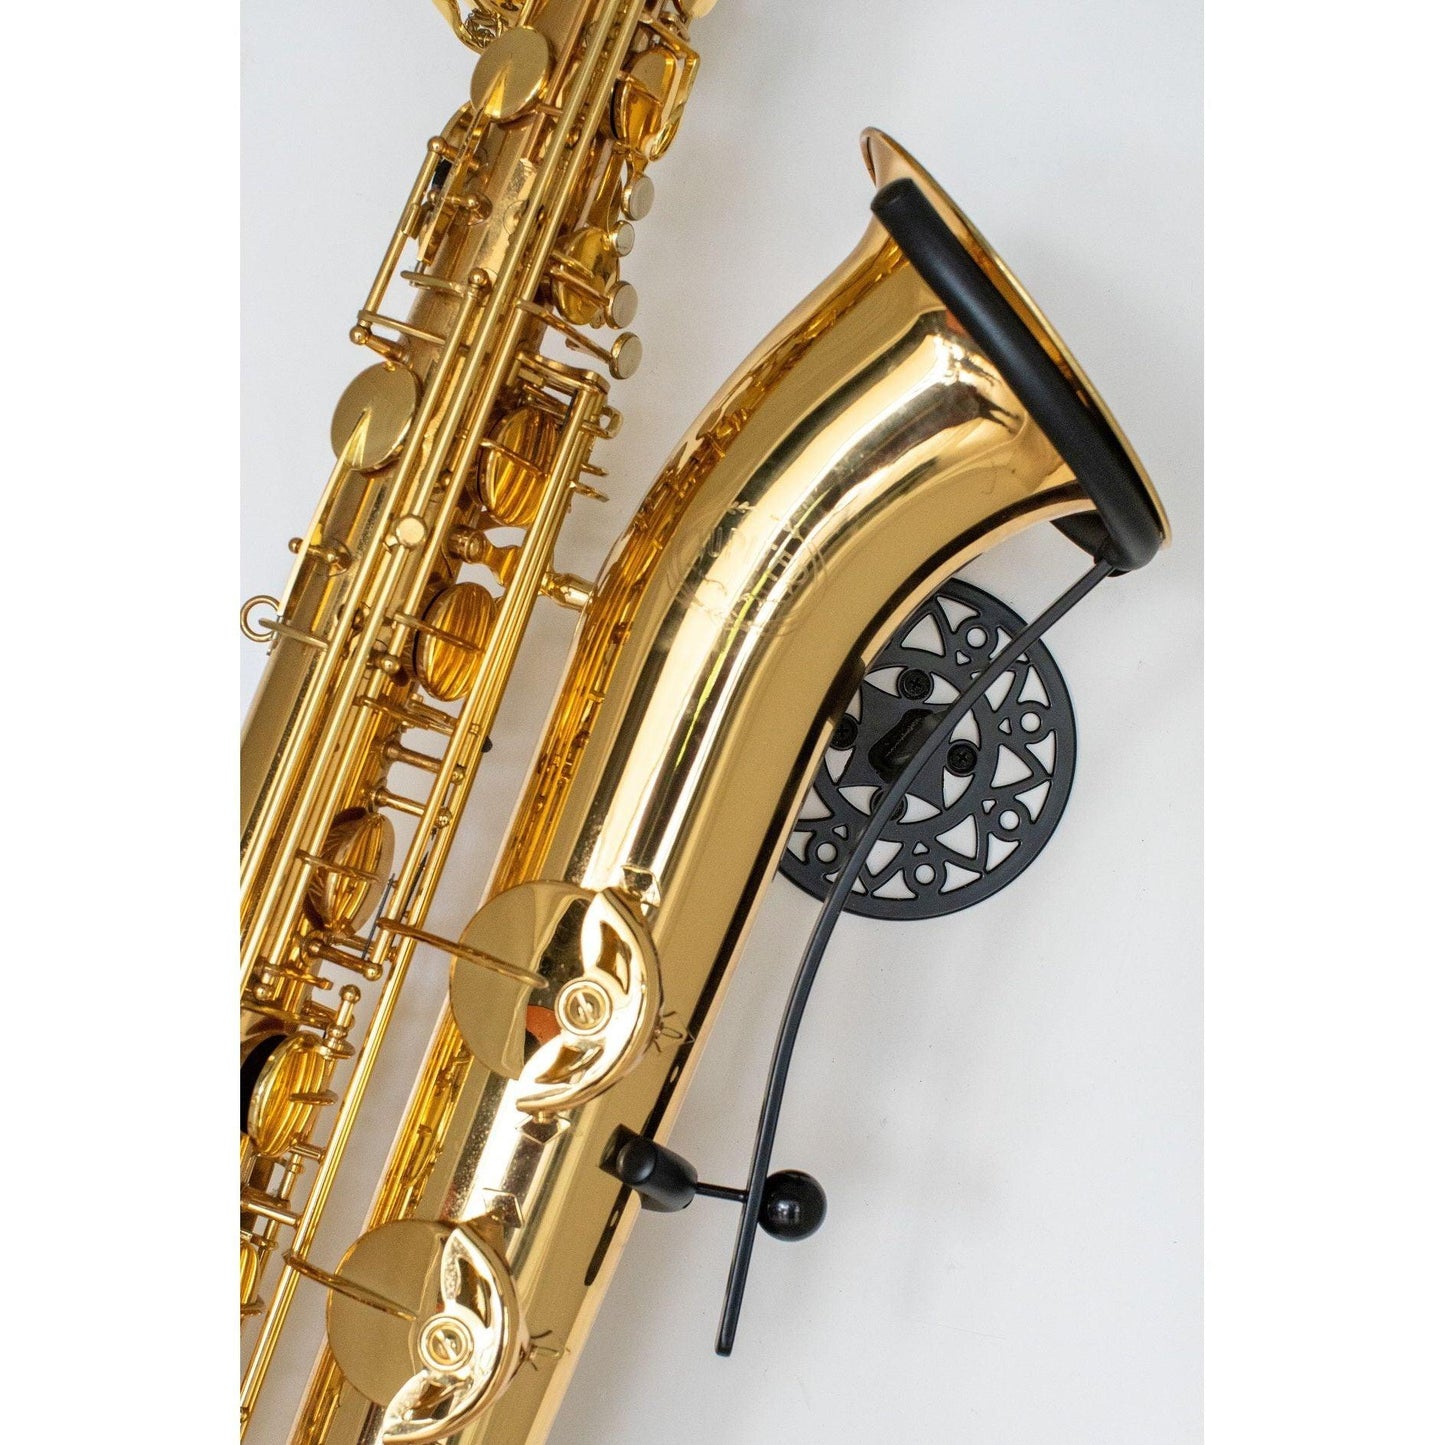 gold baritone saxophone in wallmount Aztec on white wall by Locoparasaxo.com